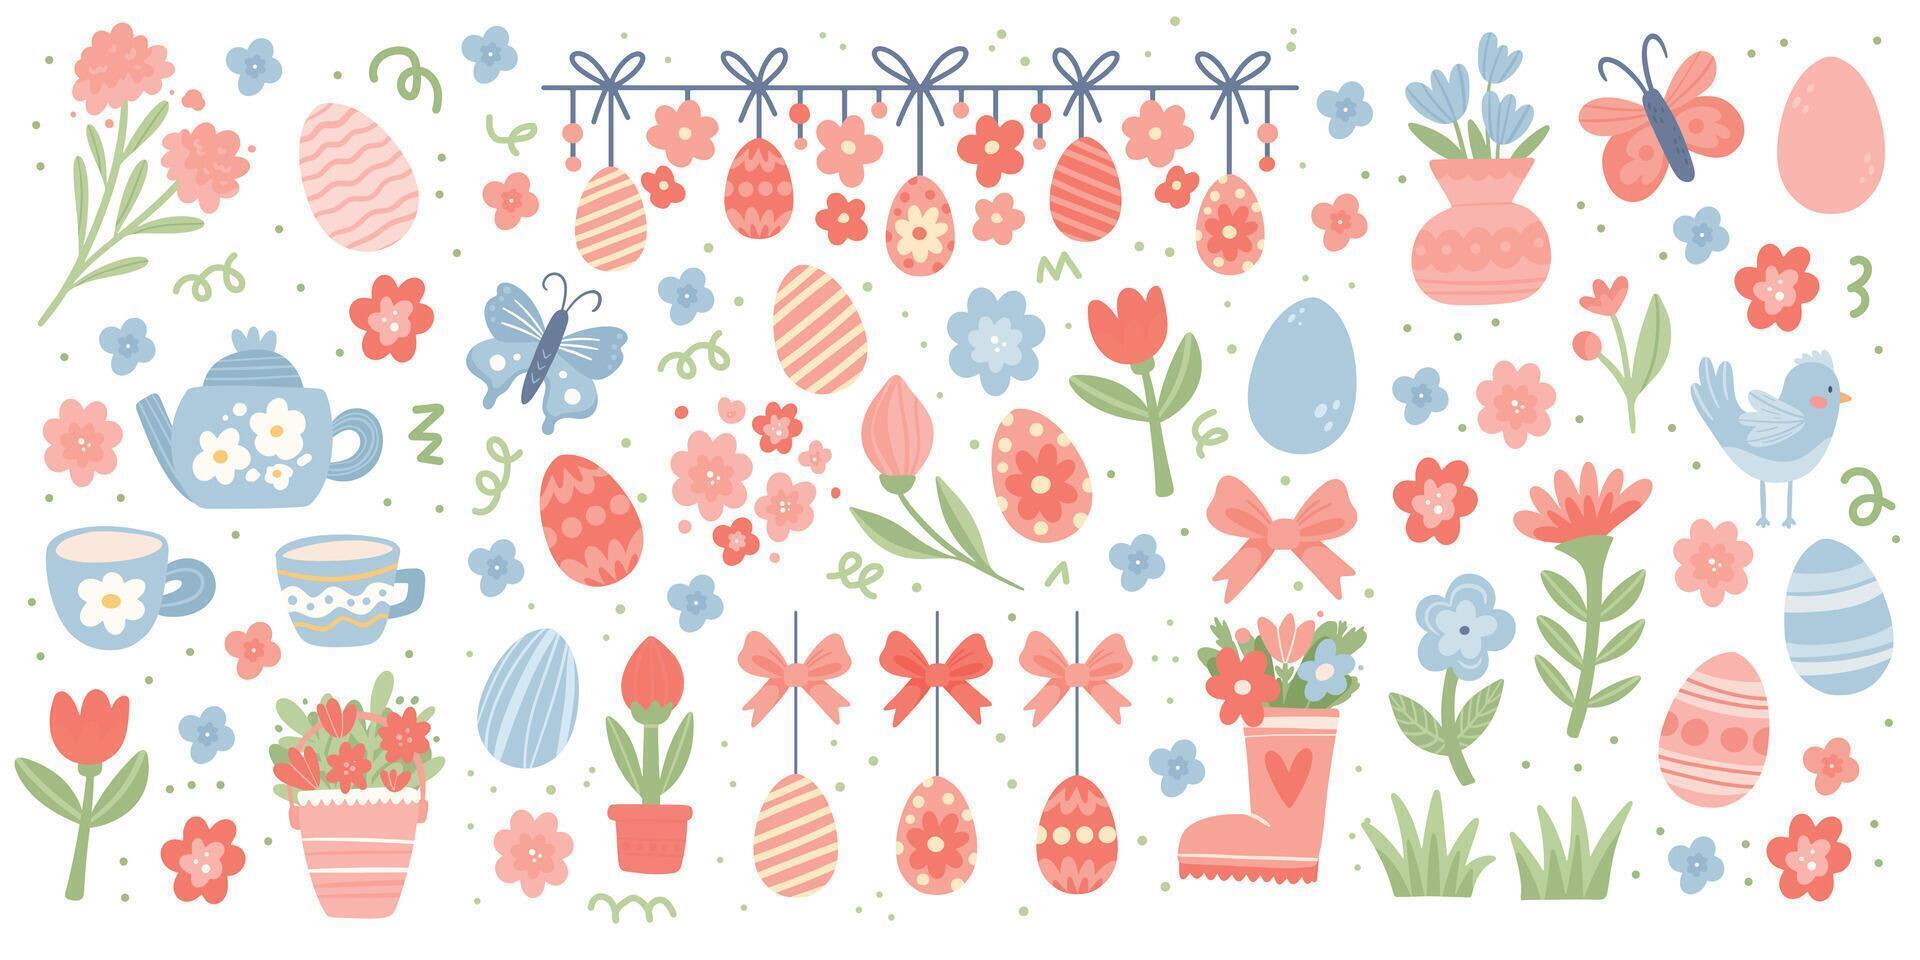 Set of Happy Easter elements. Cute Hand Drawn Eggs, Flowers, Garland and other. Spring Aesthetic Stickers vector